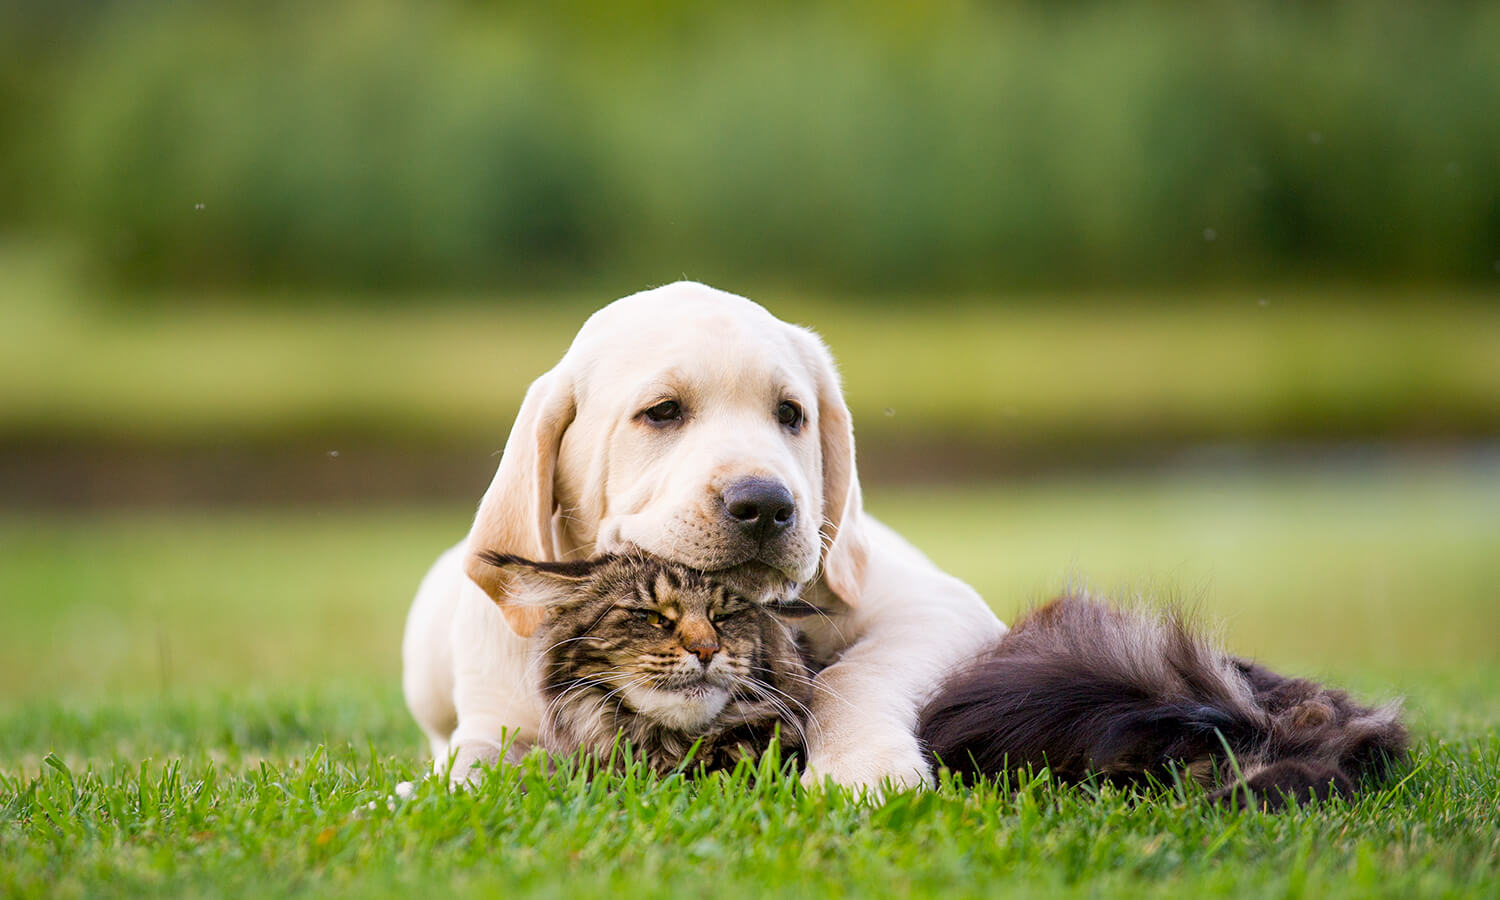 A puppy and kitten outdoors